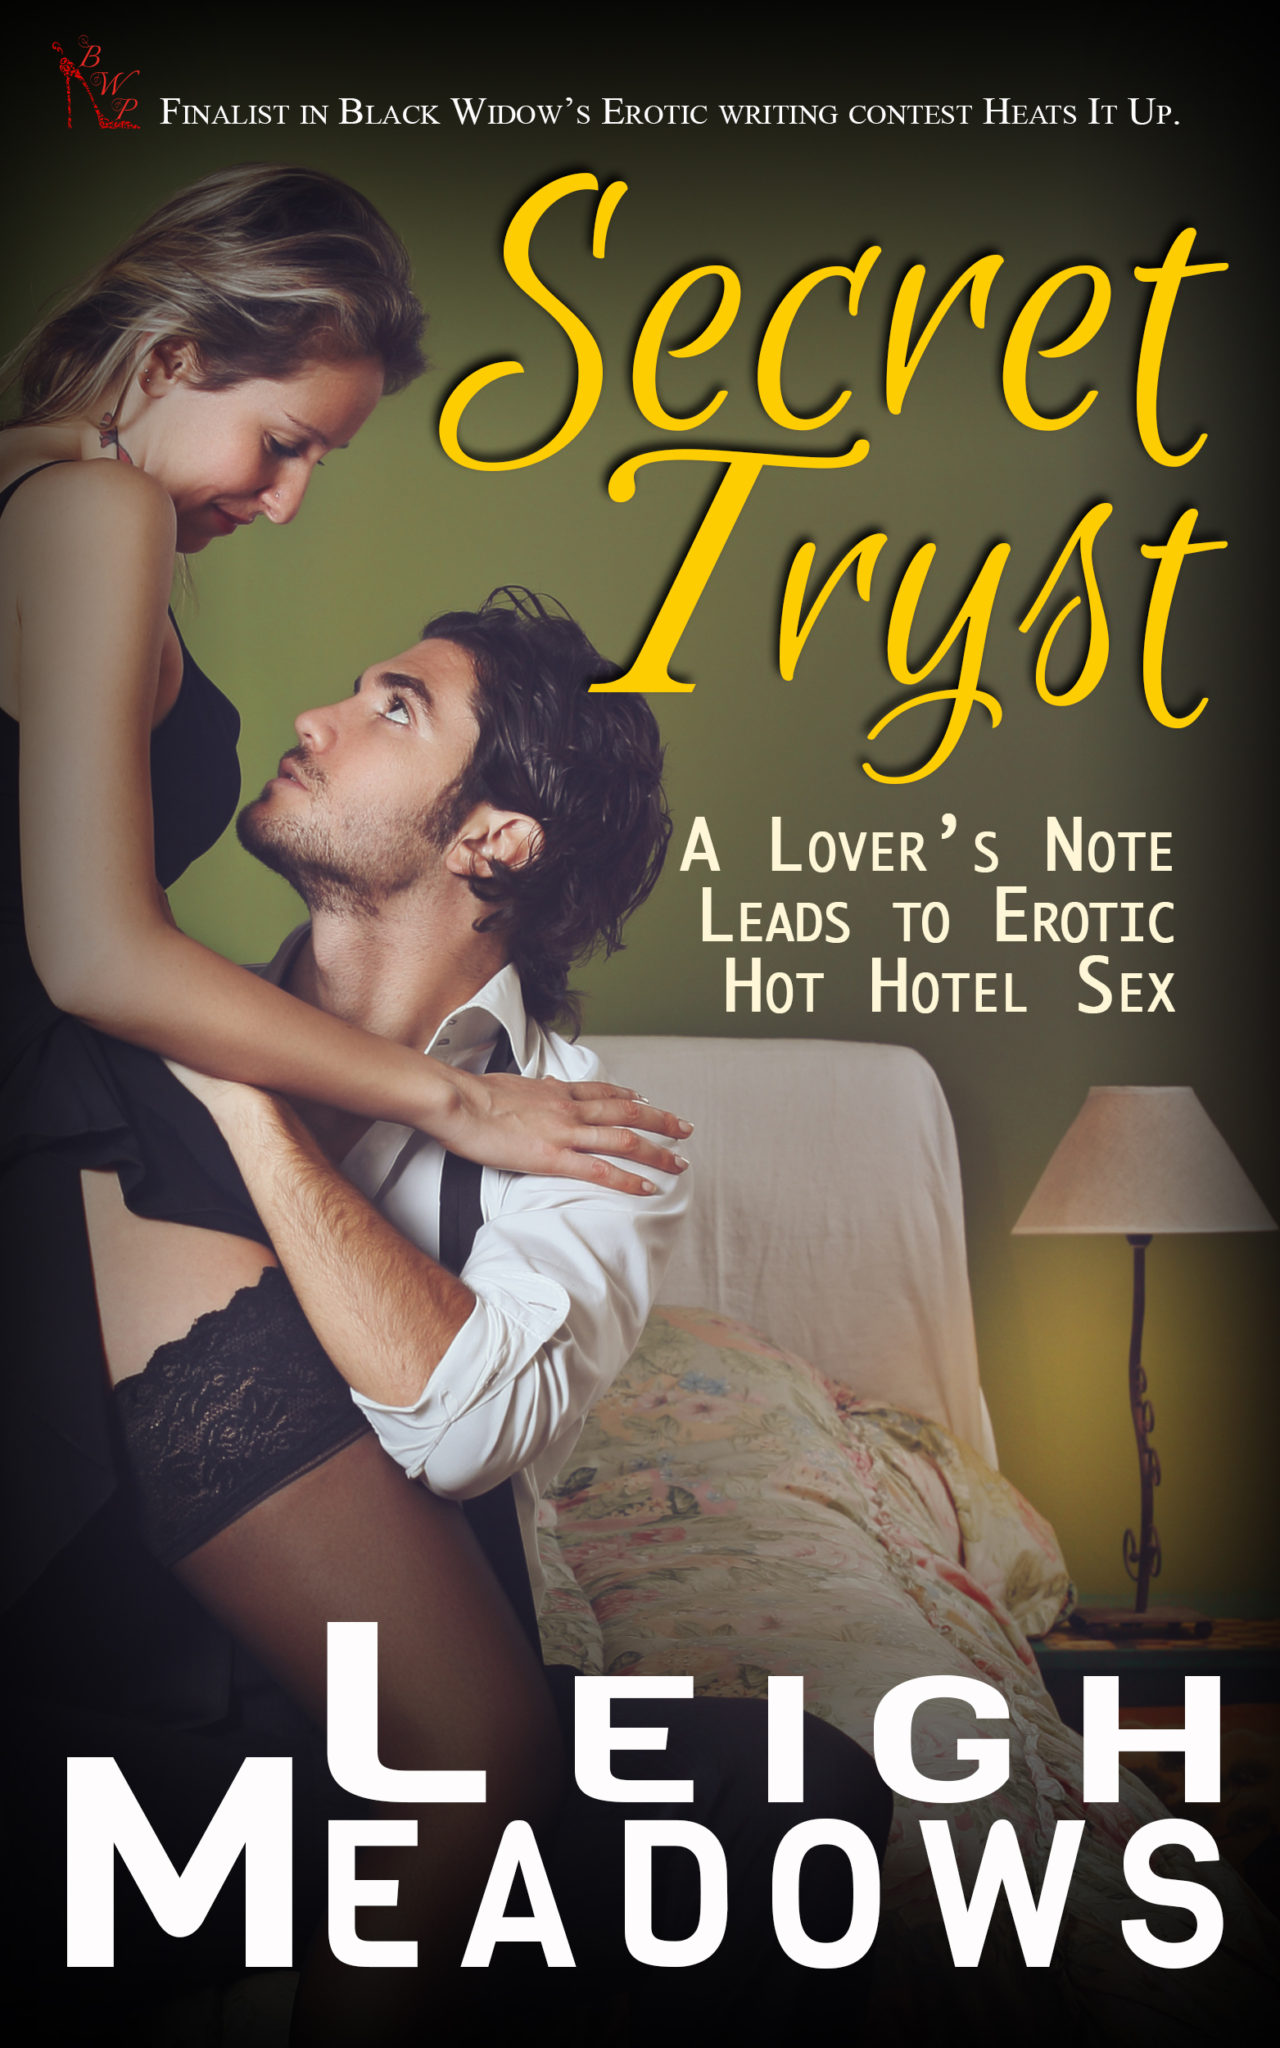 FREE: Secret Tryst: A Lover’s Note by Leigh Meadows